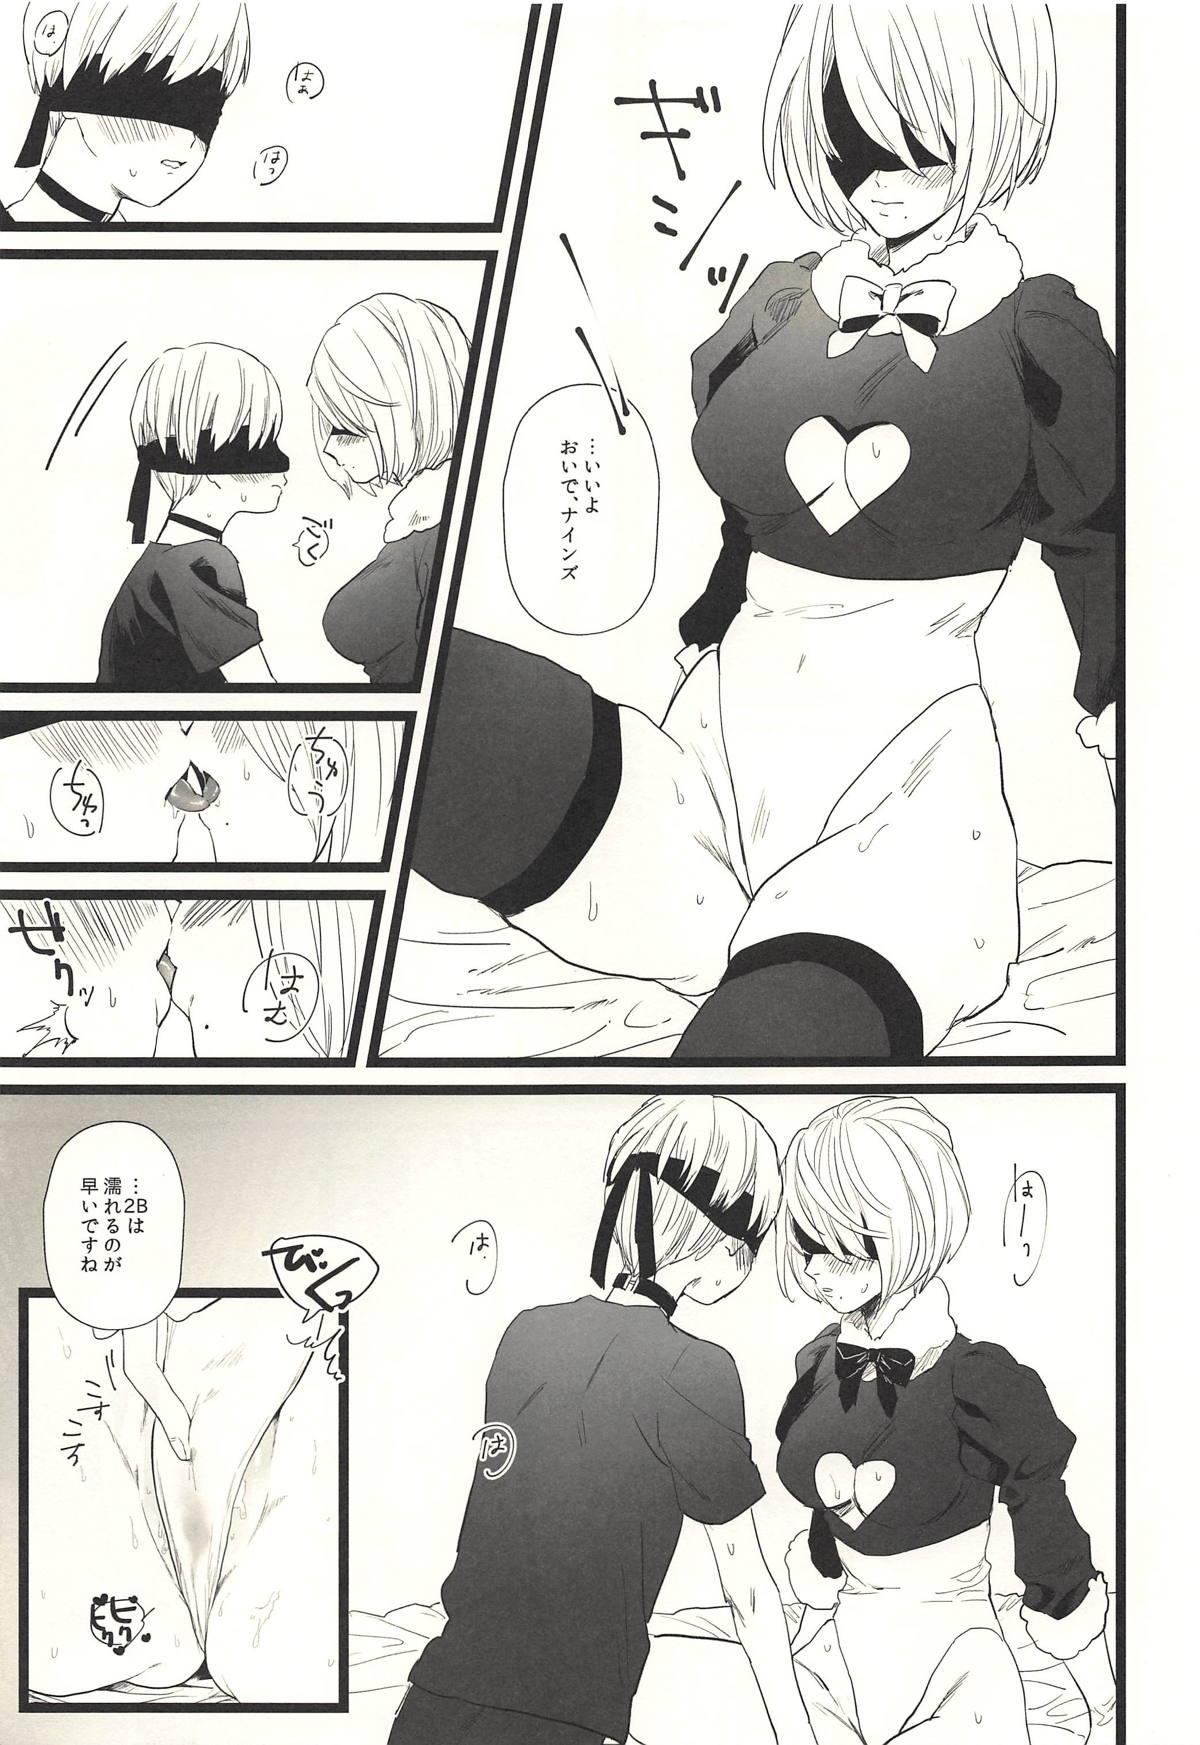 Boobs ONE MORE TIME - Nier automata Orgy - Page 8